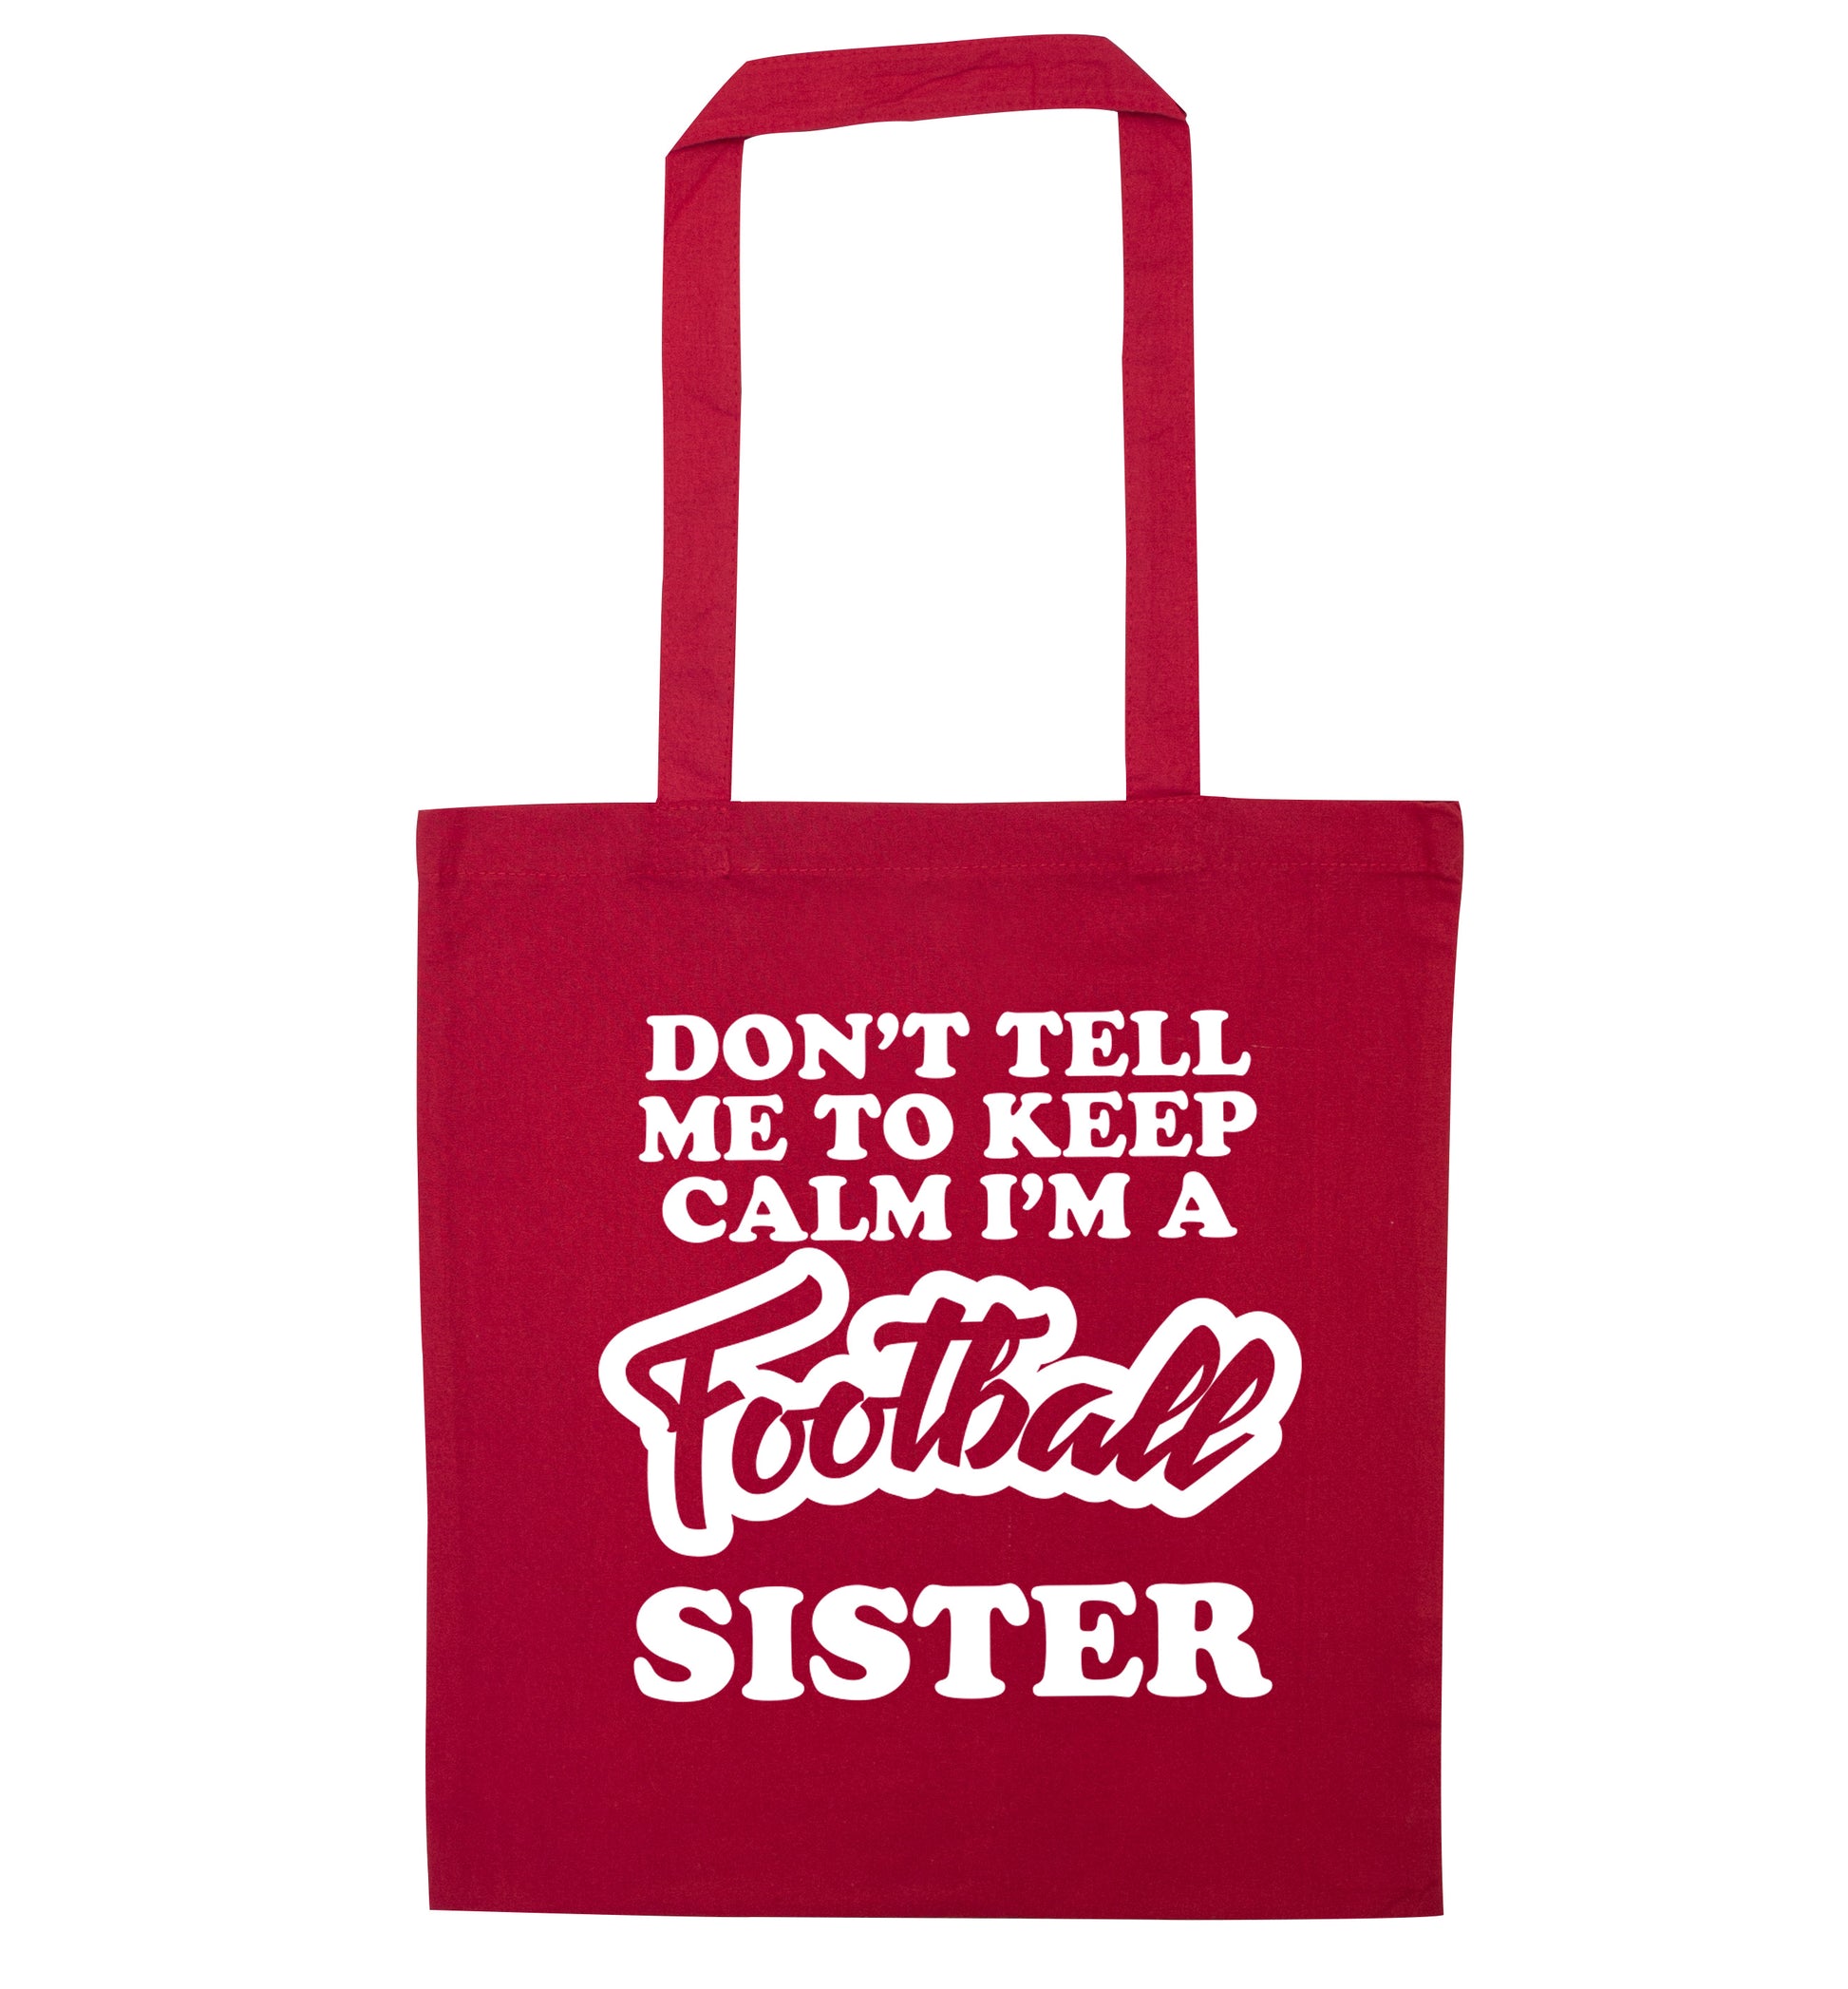 Don't tell me to keep calm I'm a football sister red tote bag